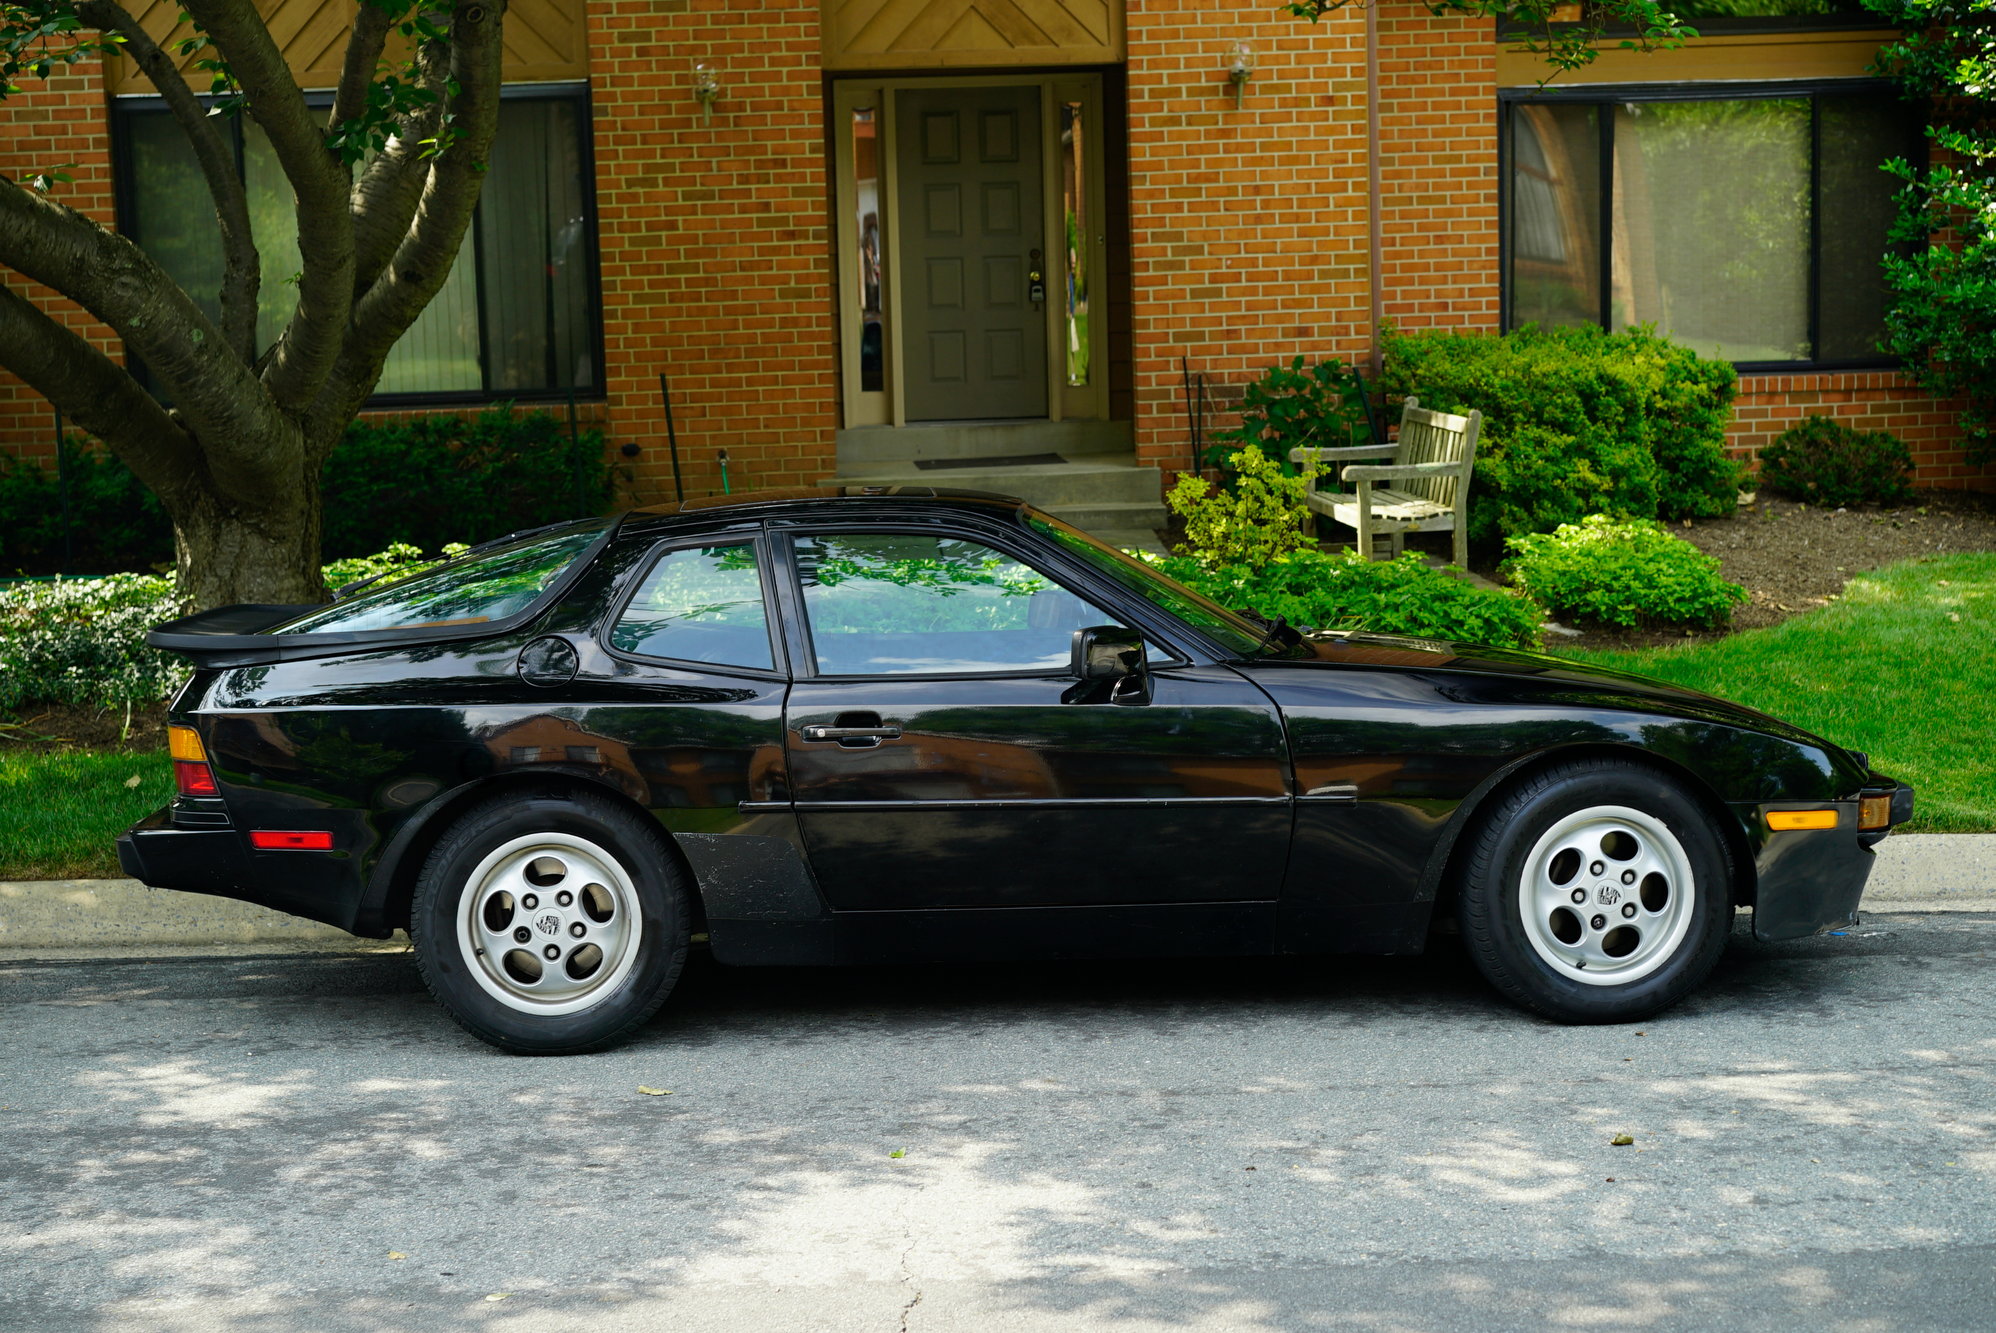 1989 Porsche 944 - 1989 Porsche 944, NA 2.7L - Black - Used - VIN WP0AA0946KN450751 - 115,110 Miles - 4 cyl - 2WD - Manual - Coupe - Black - Potomac, MD 20854, United States